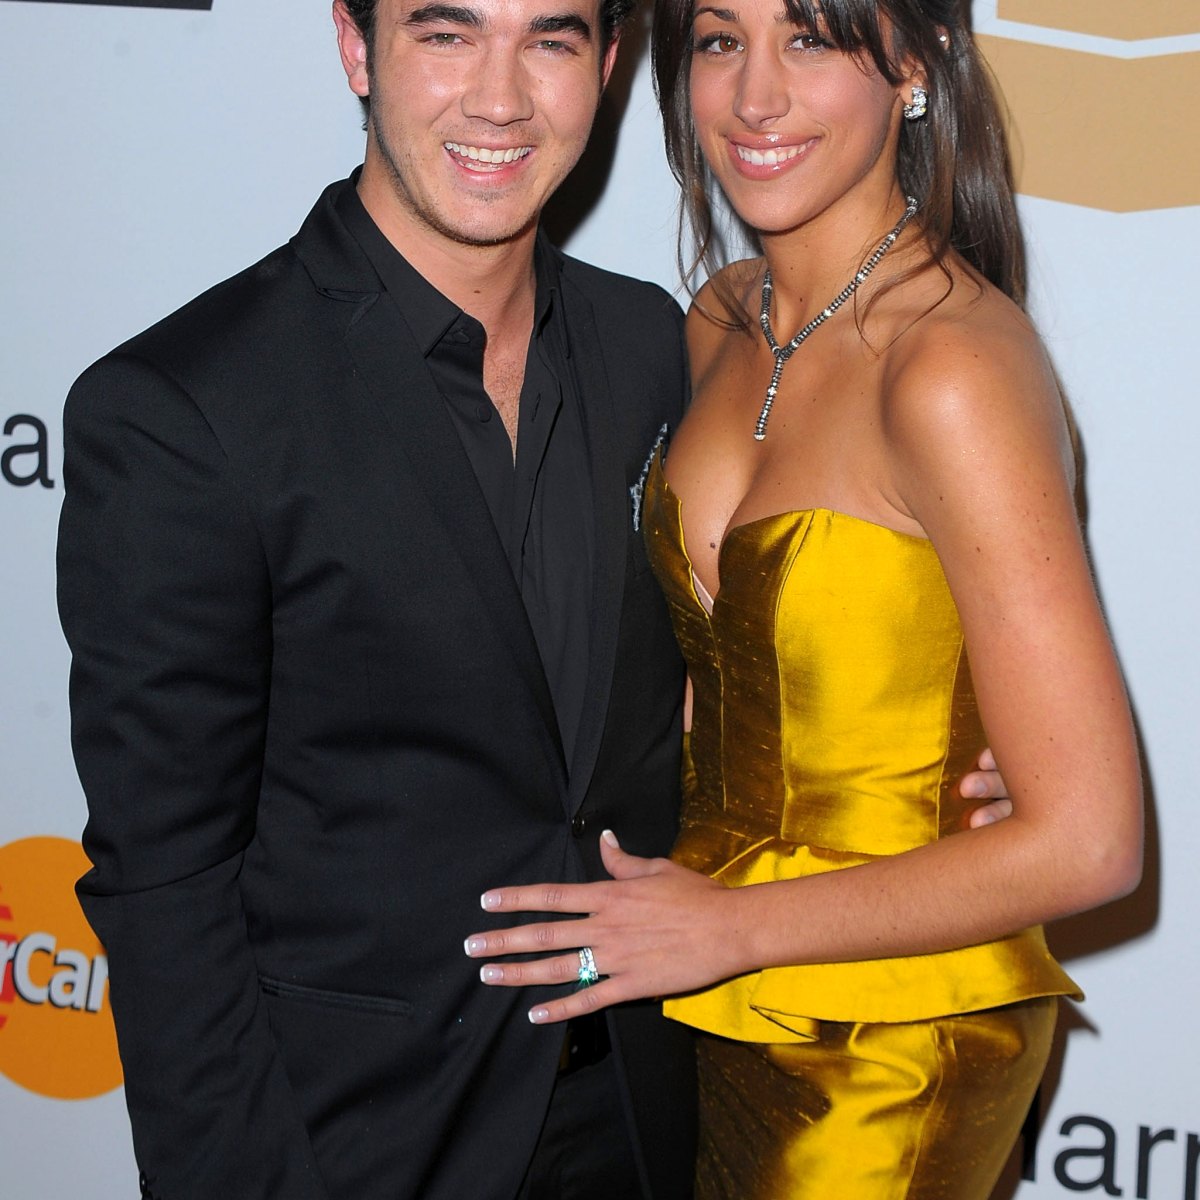 Kevin Jonas Celebrates 10-Year Anniversary With Wife Danielle With